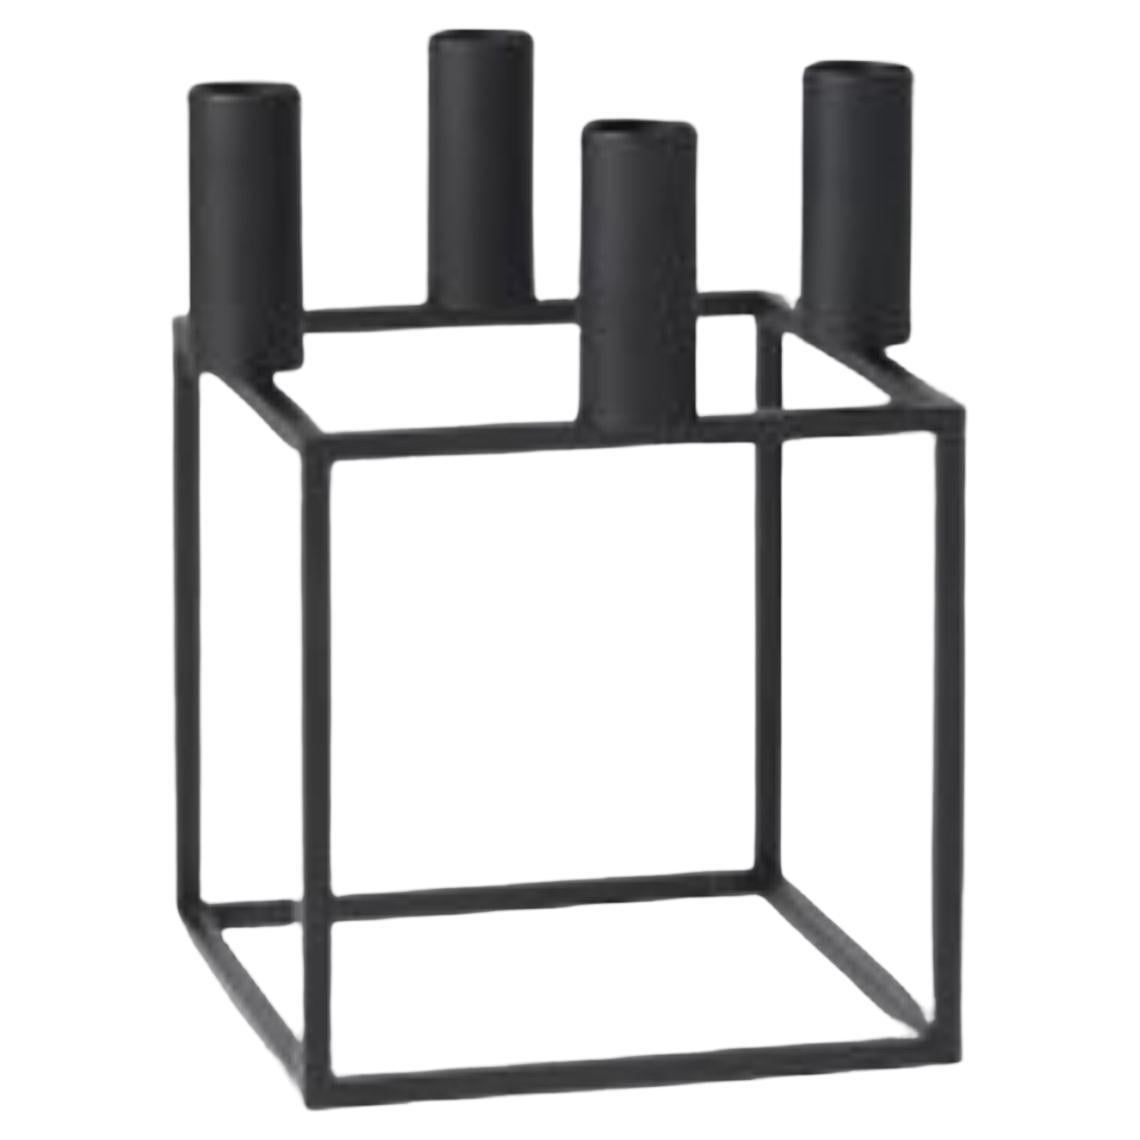 Set of 2 Black Kubus and Base 4 Candle Holder by Lassen For Sale